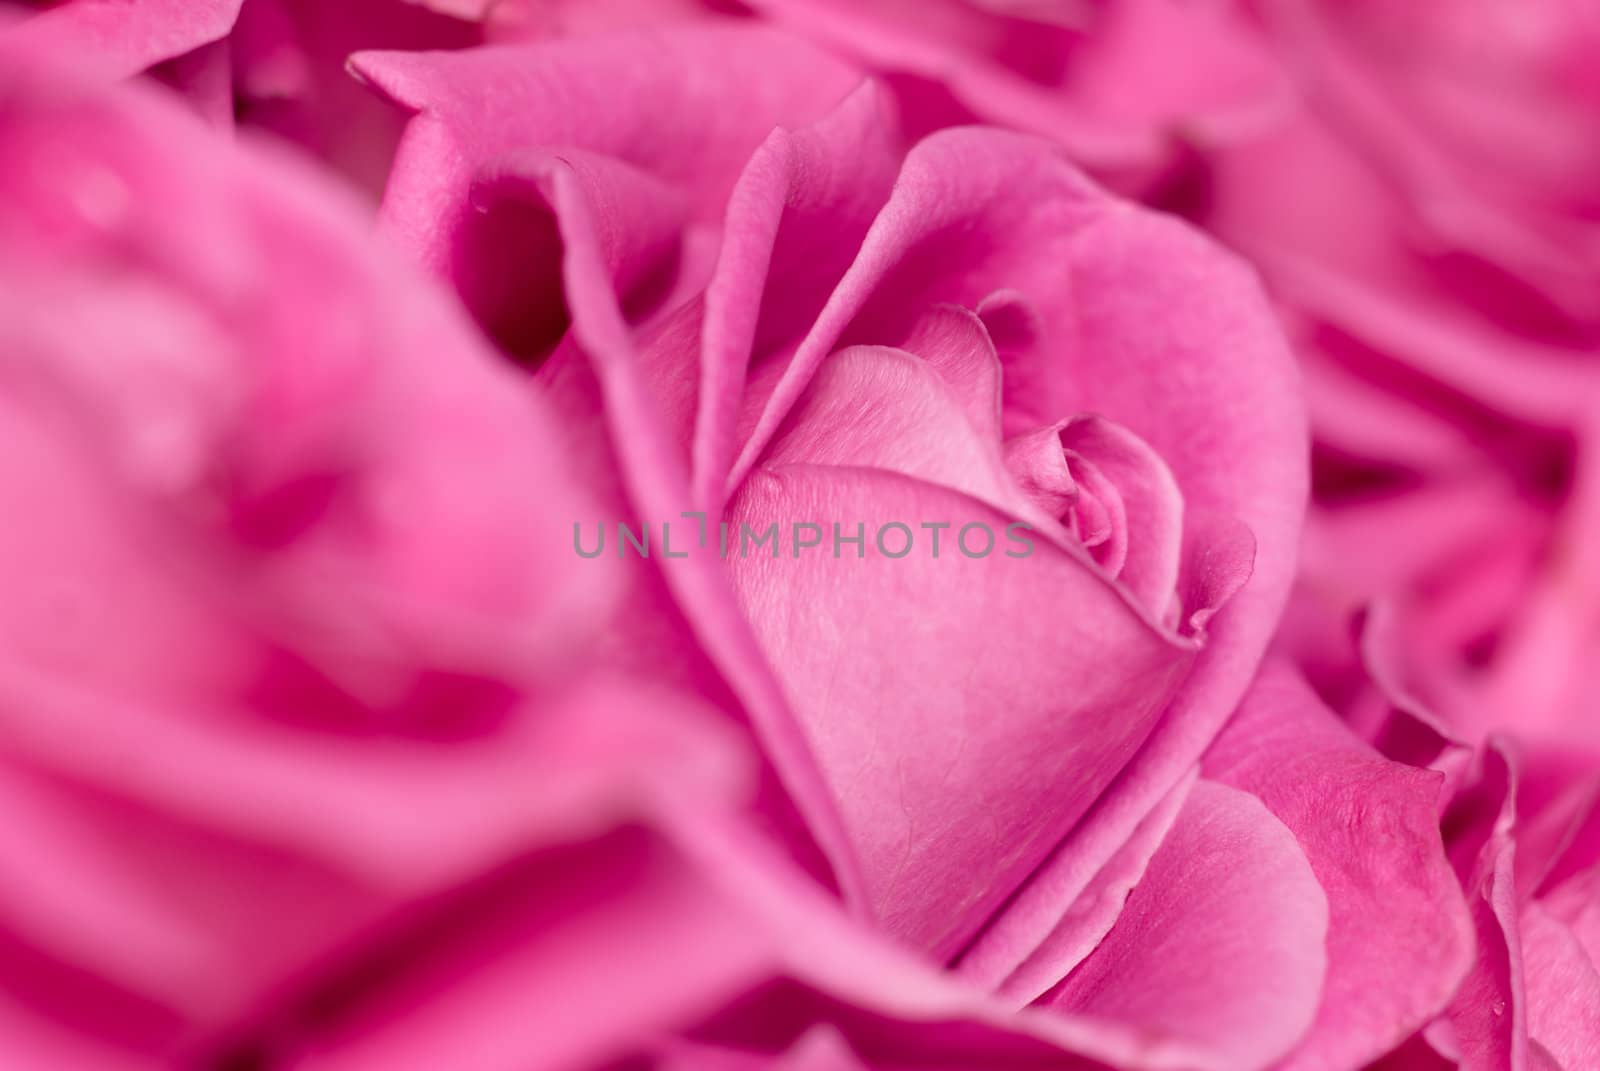 Pink roses - intentional shallow depth of field.